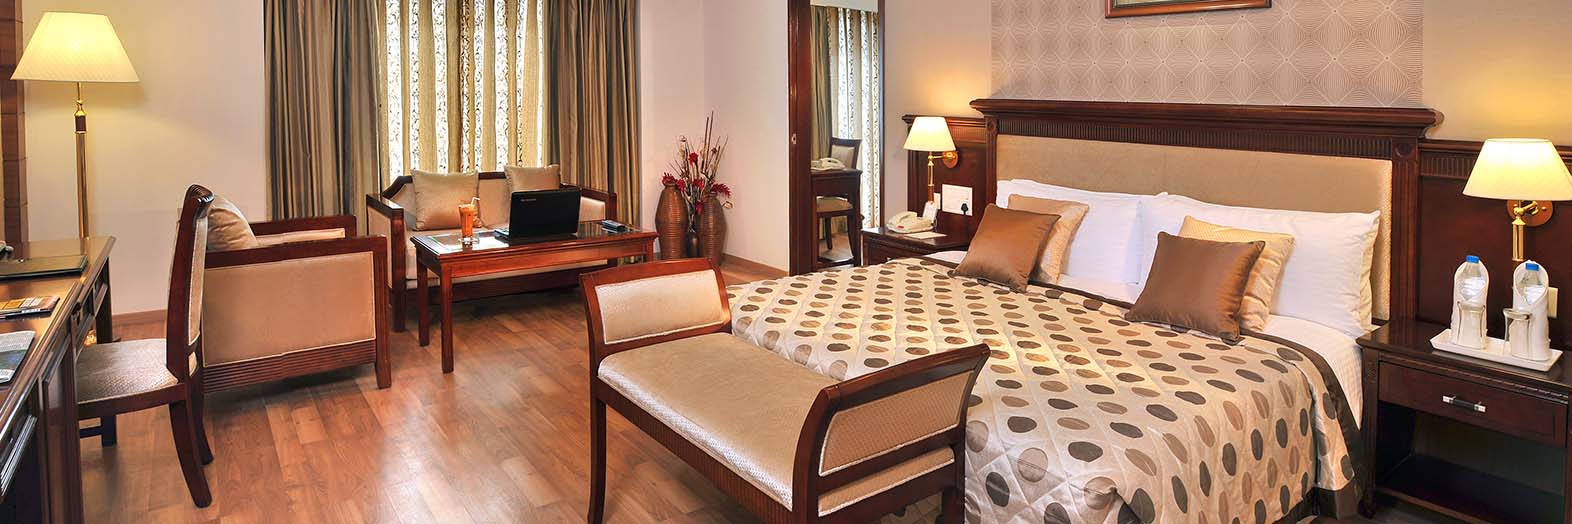 Fortune JP Palace – Hotels in Mysore Room